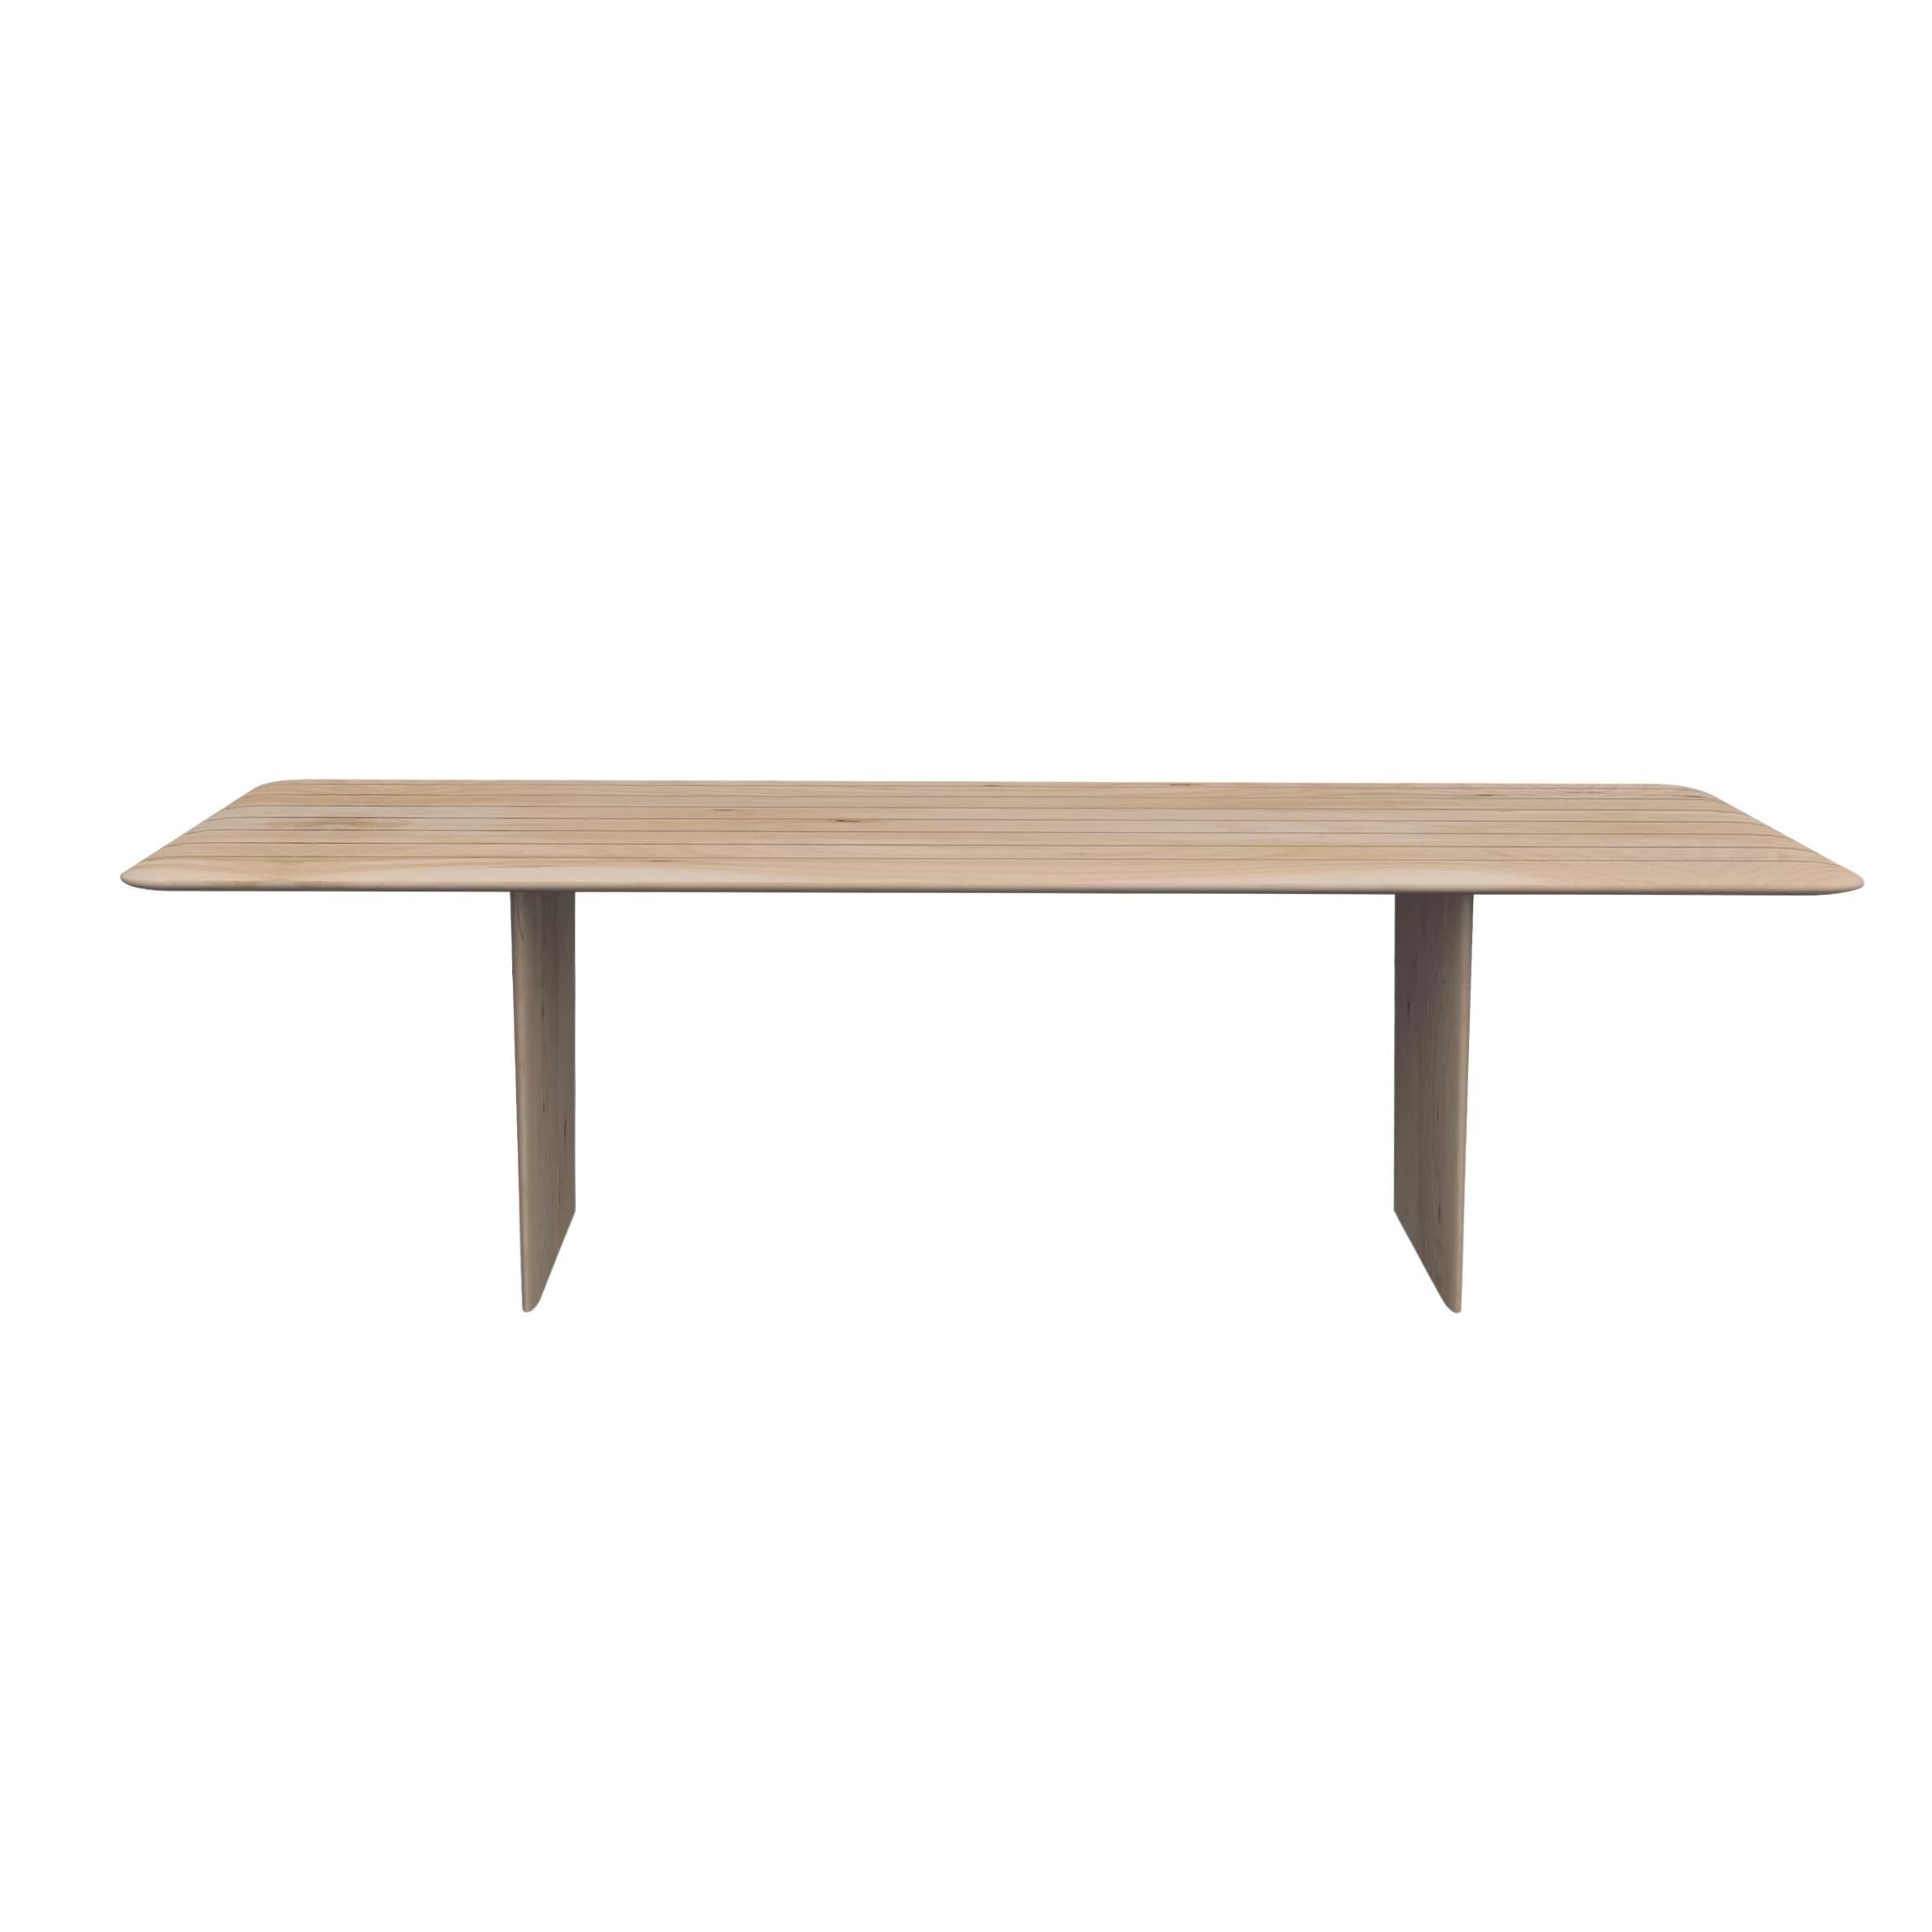 Crafted entirely from solid scented cedar wood, this table features rounded sides and thin, beveled edges on both the top and legs, lending it a delicate and sinuous design. Its lightness is accentuated by the thoughtful use of rounded edges